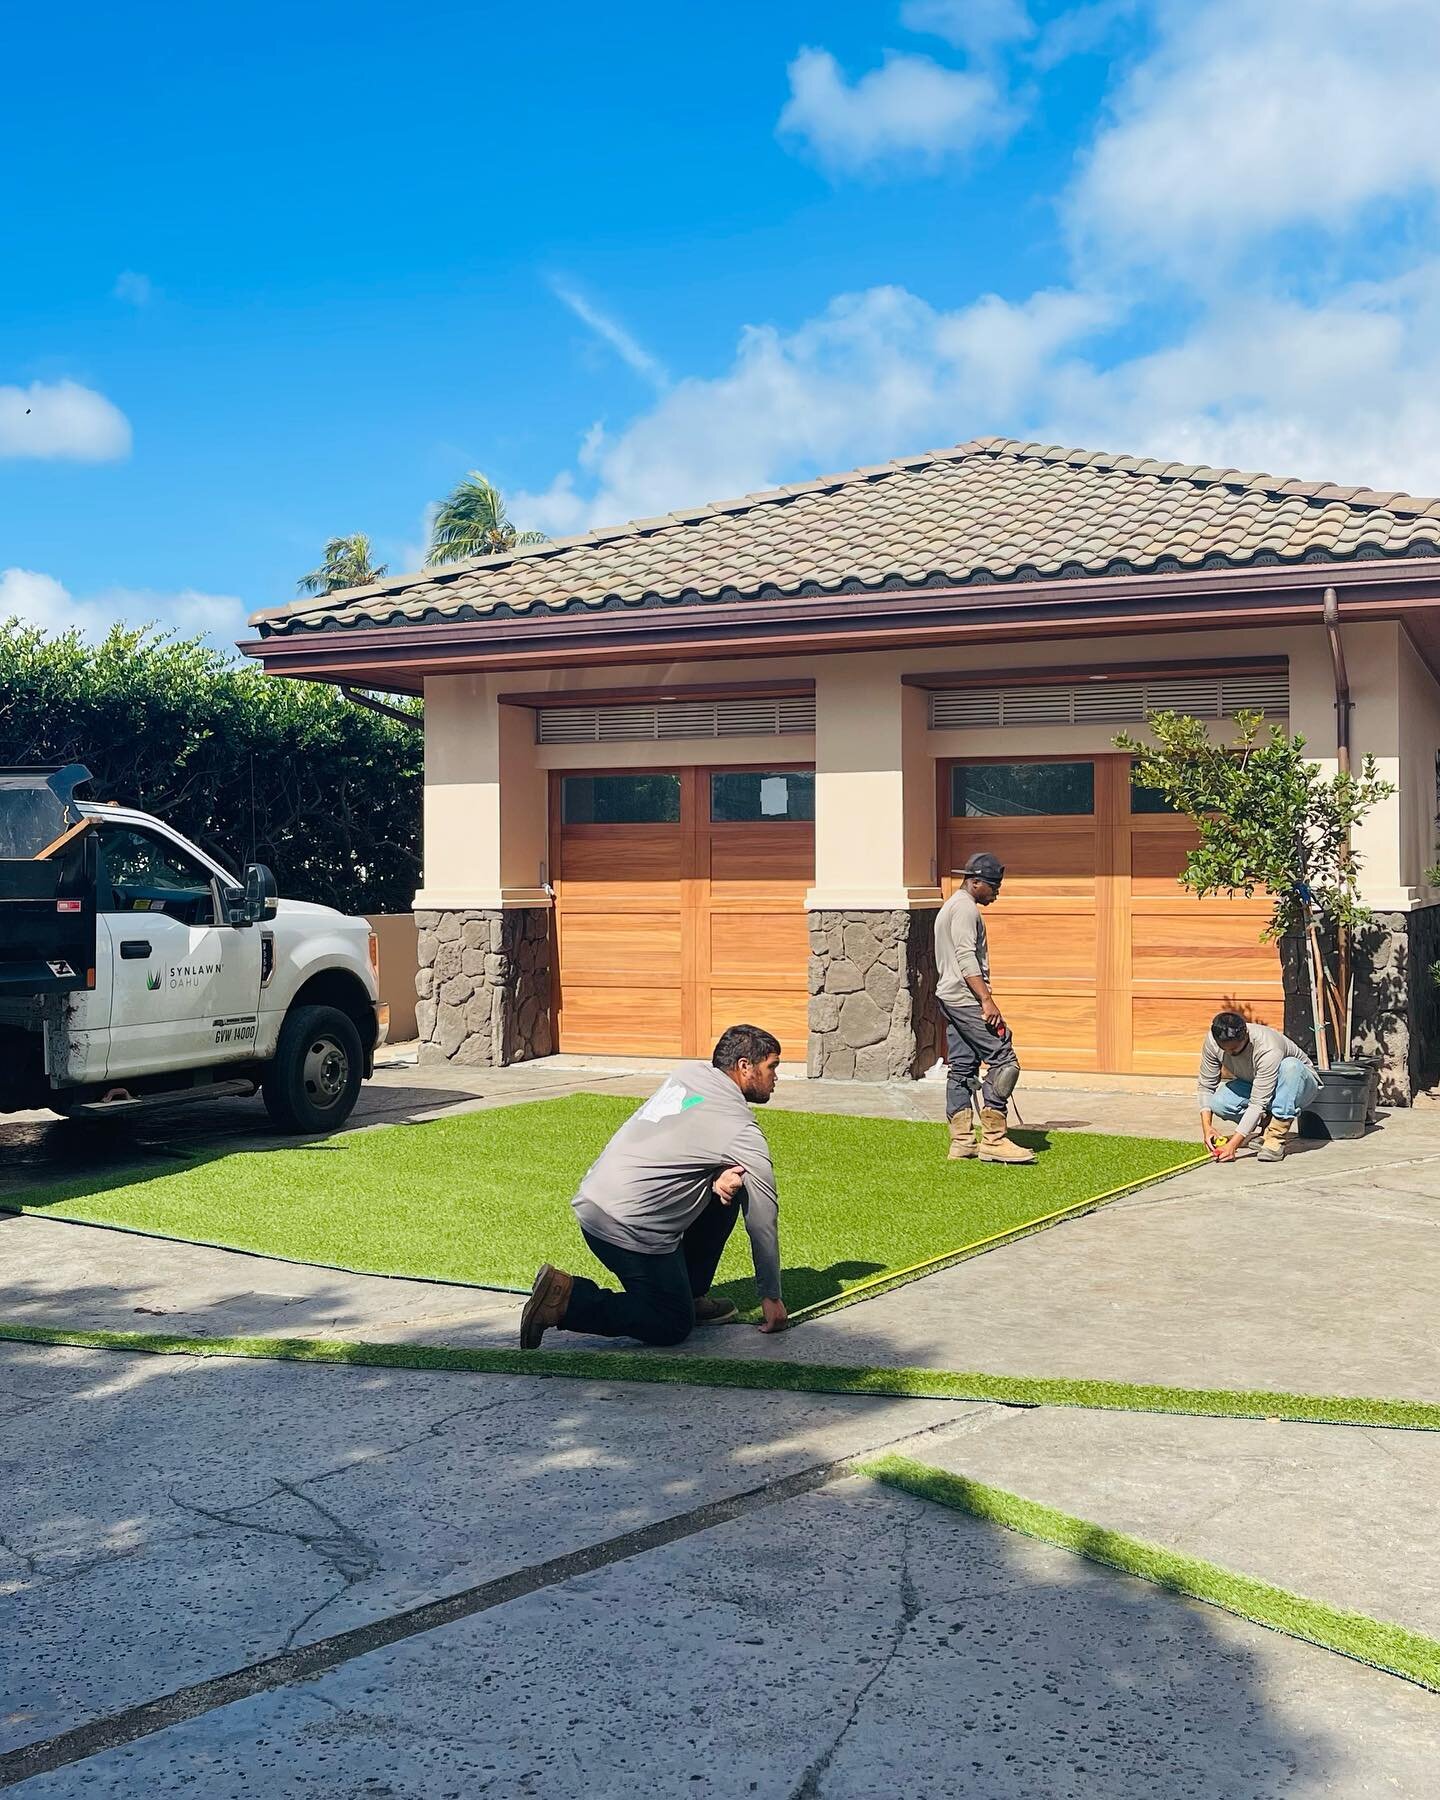 Our bio based products are the way to go, give us a call for your estimate today. ♻️ #5931864
#SYNlawnOahu #Hawaiilandscaping #SyntheticTurf #ArtificialGrass #Turf #Grass #SynLawn #lifetimewarranty #biobasedproducts #savewater #savetime #getyourweeke